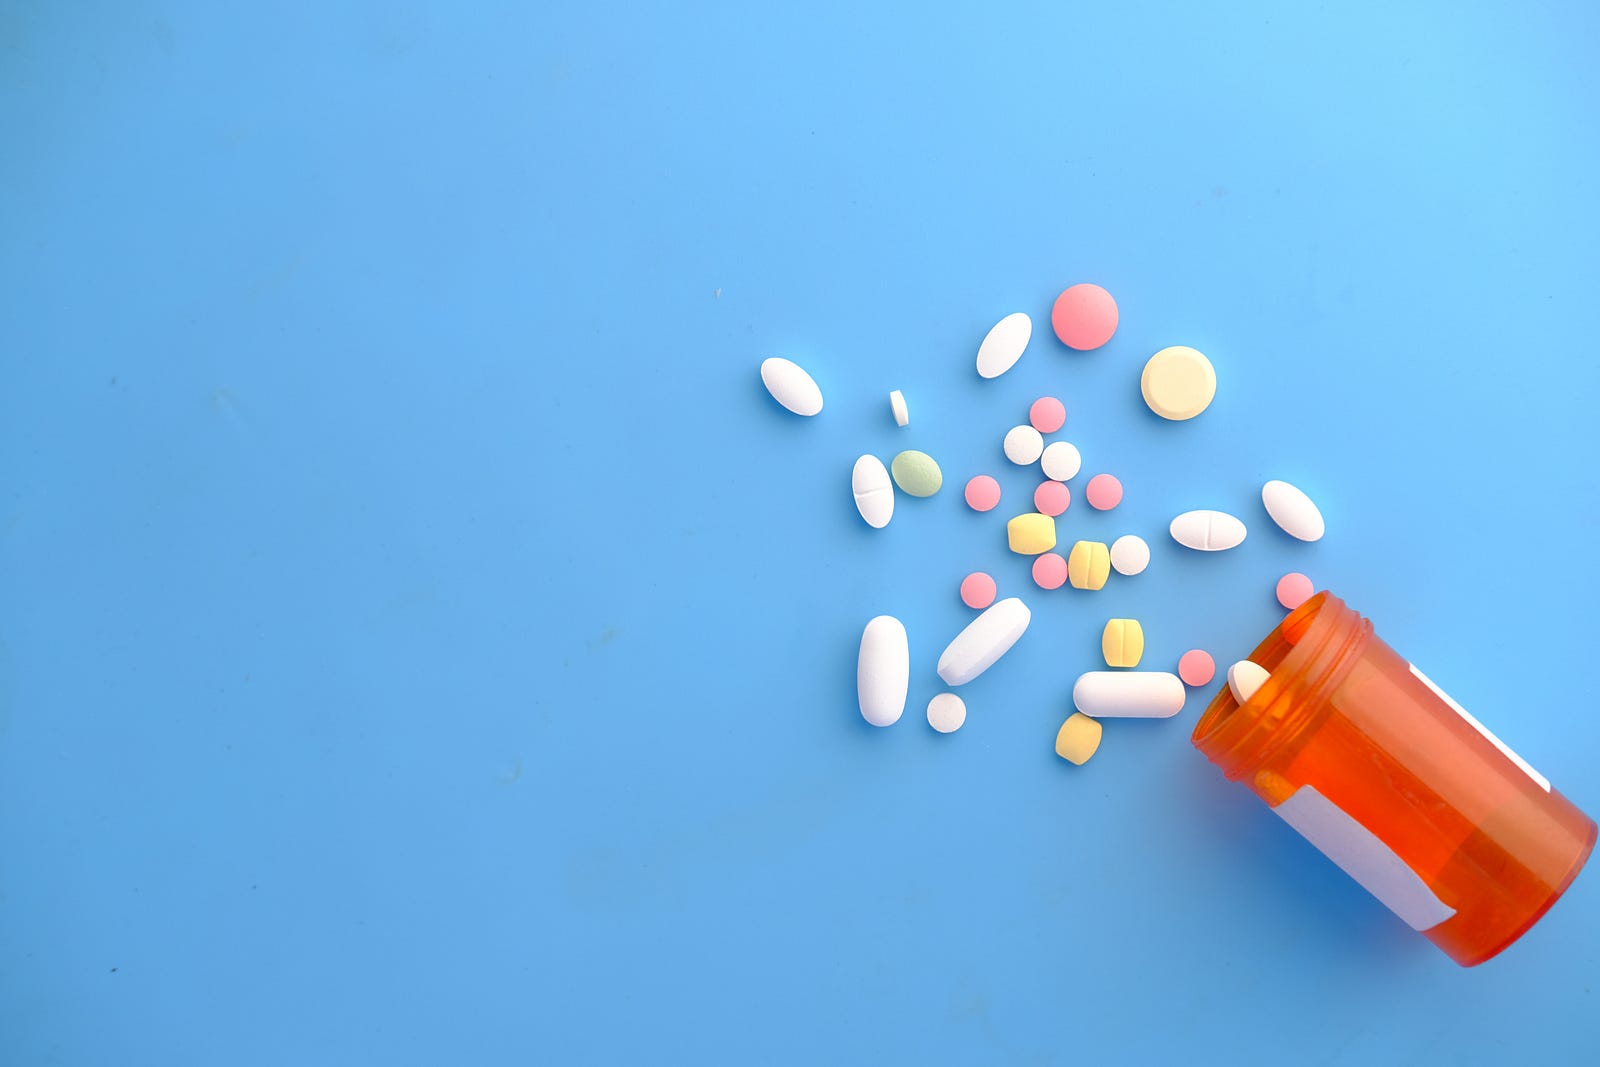 Multicolored pills and capsules spill out of a small brown medicine bottle. . Drugs like solriamfetol (Sunosi) can treat apnea-related sleepiness.